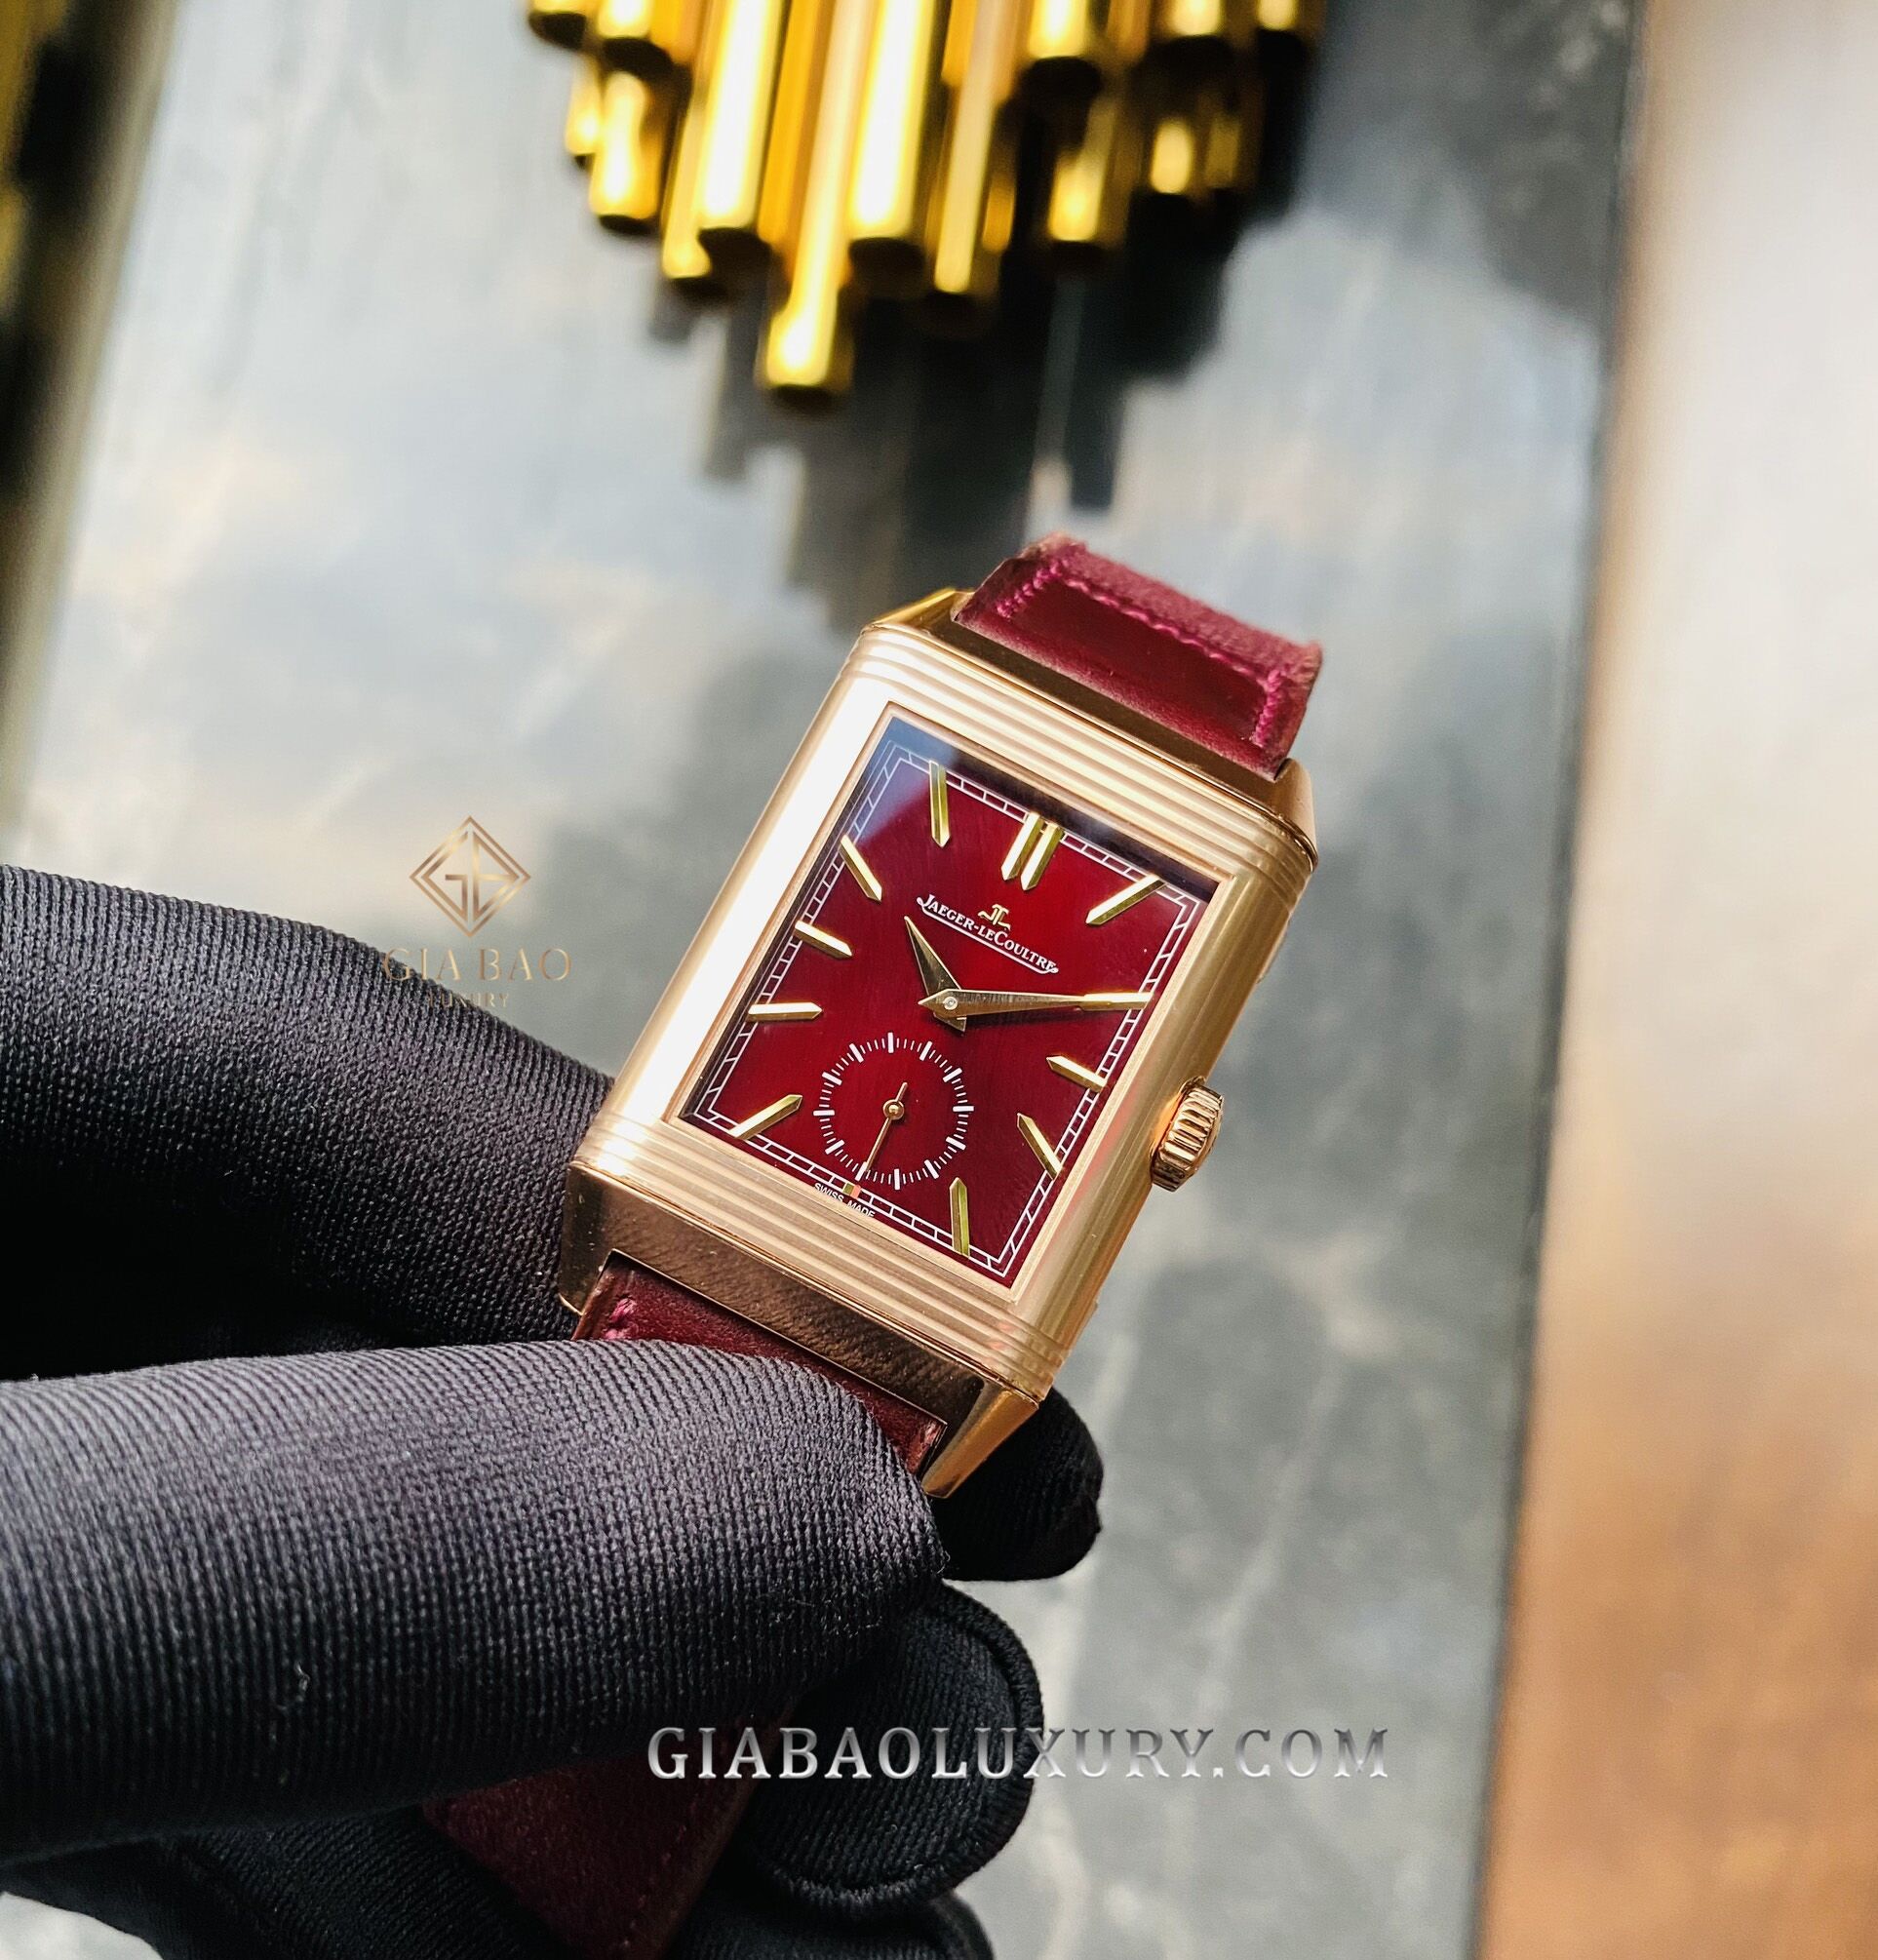 dong-ho-jaeger-lecoultre-reverso-tribute-duoface-fagliano-limited-edition-q398256j-00ef1bf9-53a2-4cfb-b903-1ef5a15c17d8.jpg?v=1636195192903